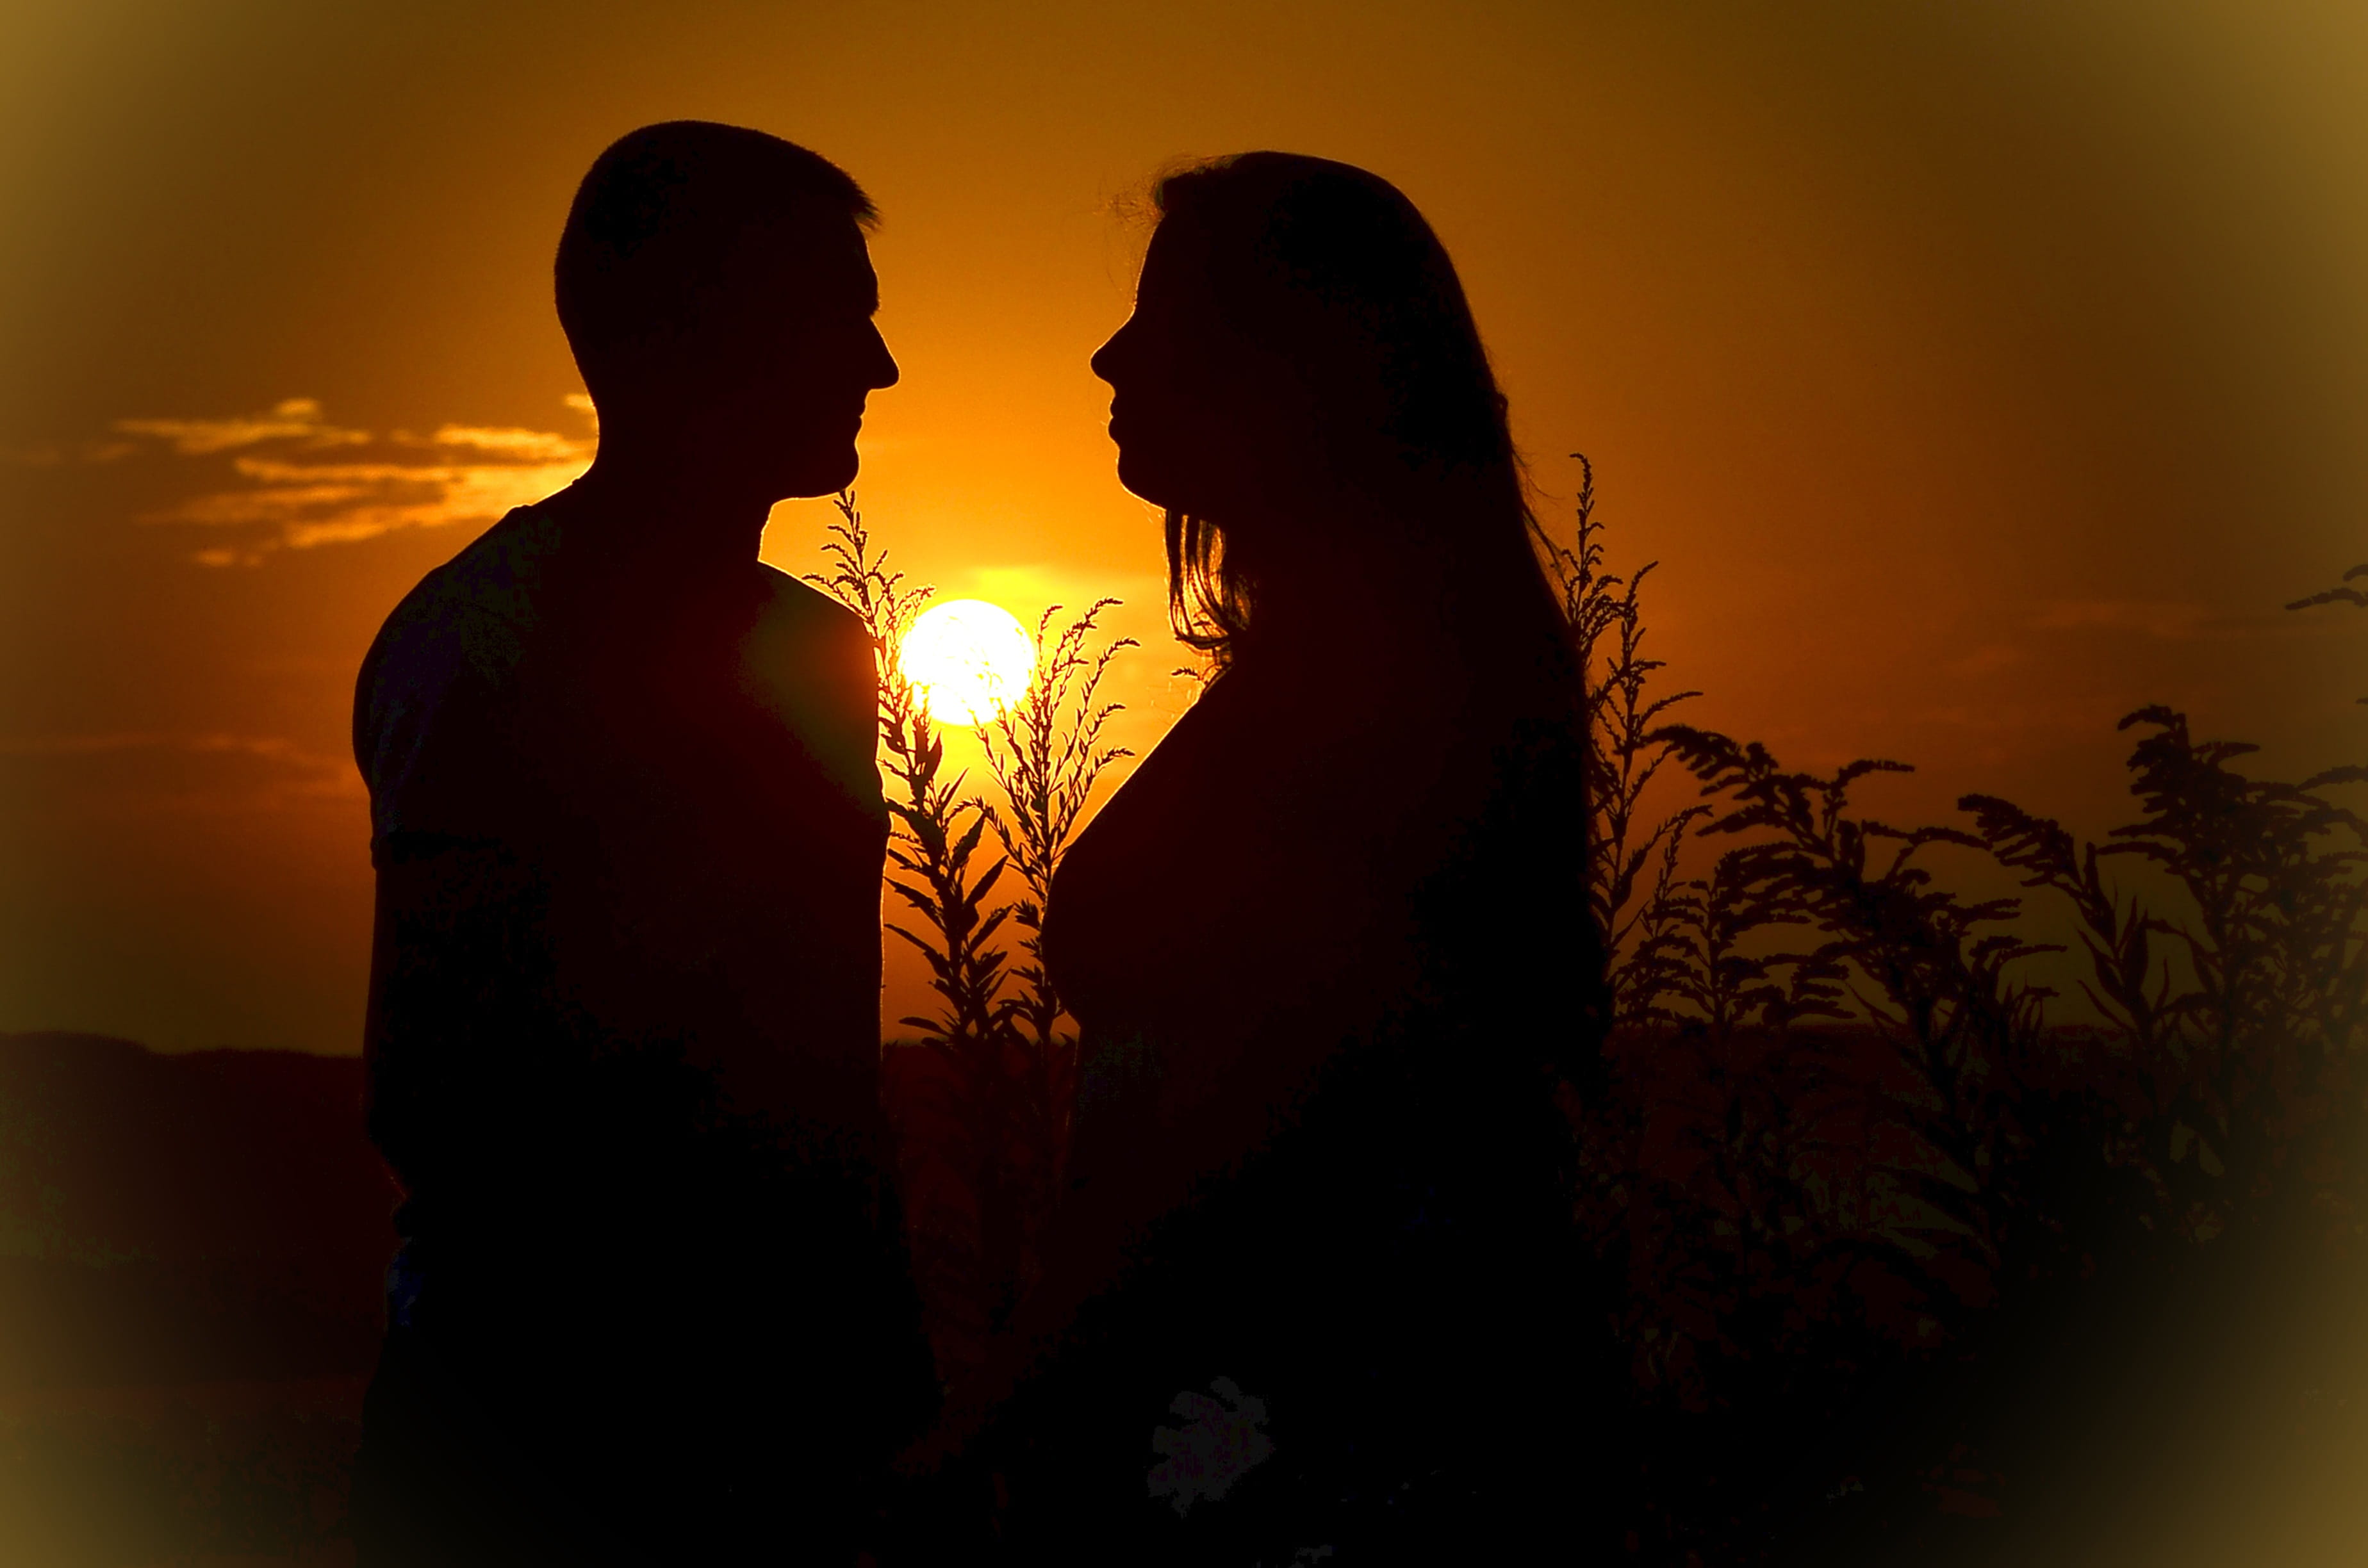 Silhouette of Man and Woman during Sunset, couple, dawn, love